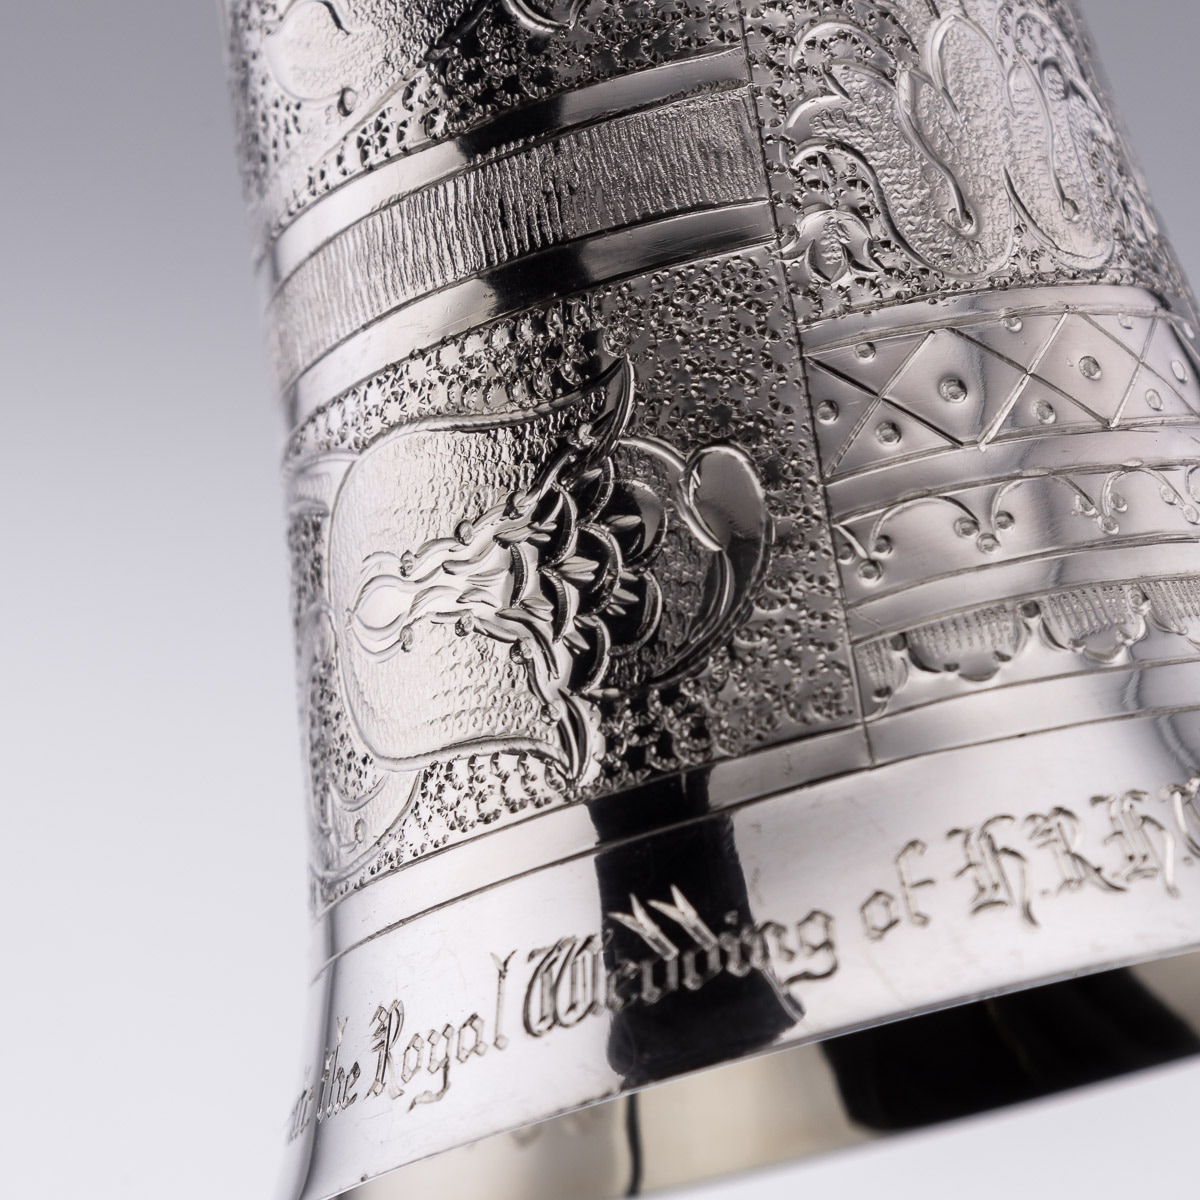 A ROYAL WEDDING SOLID STERLING SILVER NOVELTY WAGER CUP, LONDON, C. 1973 - Image 22 of 23